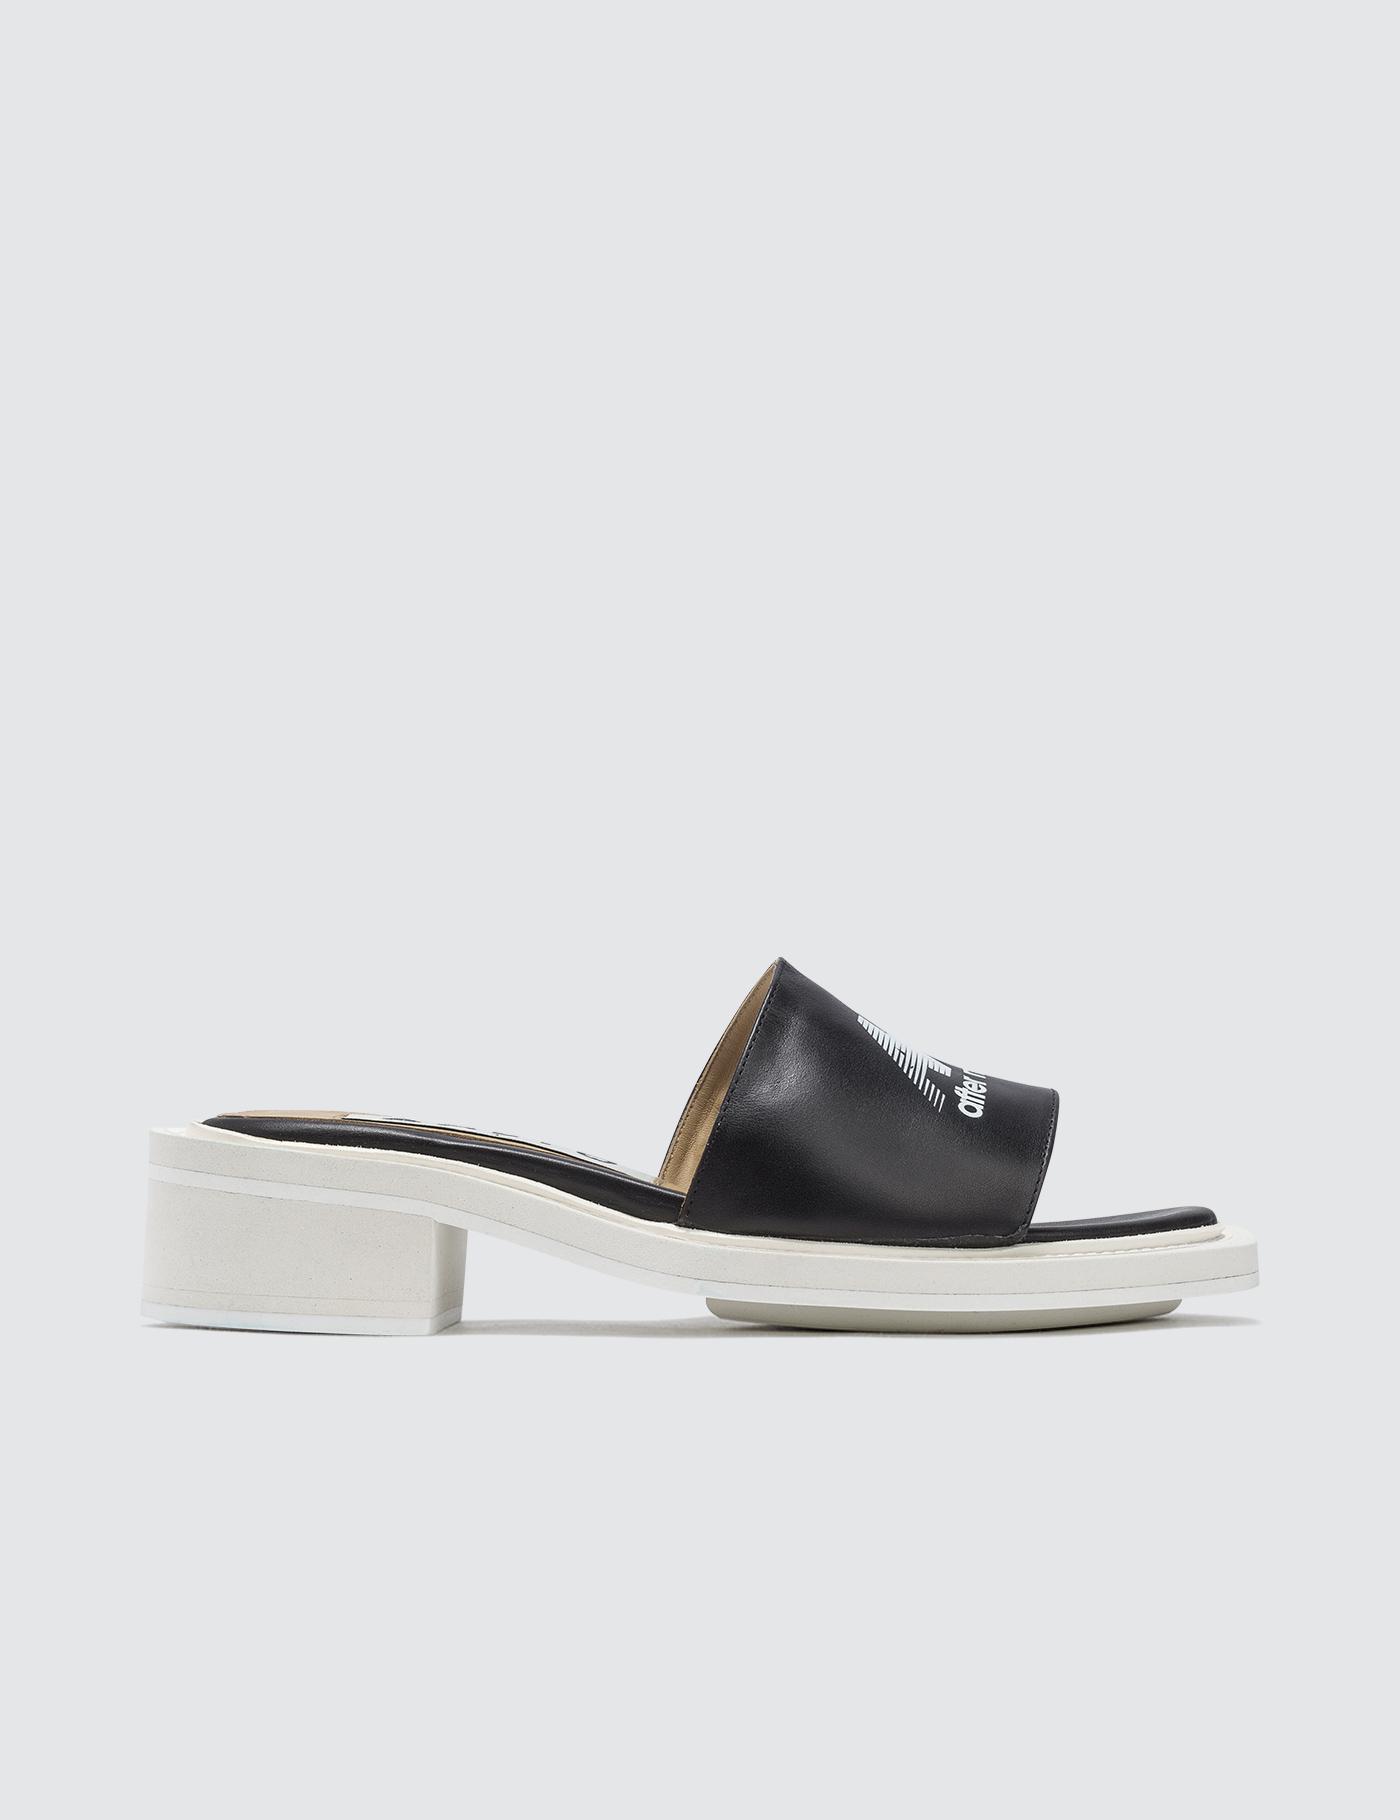 Derby Pool After Nature Sandals by AALTO